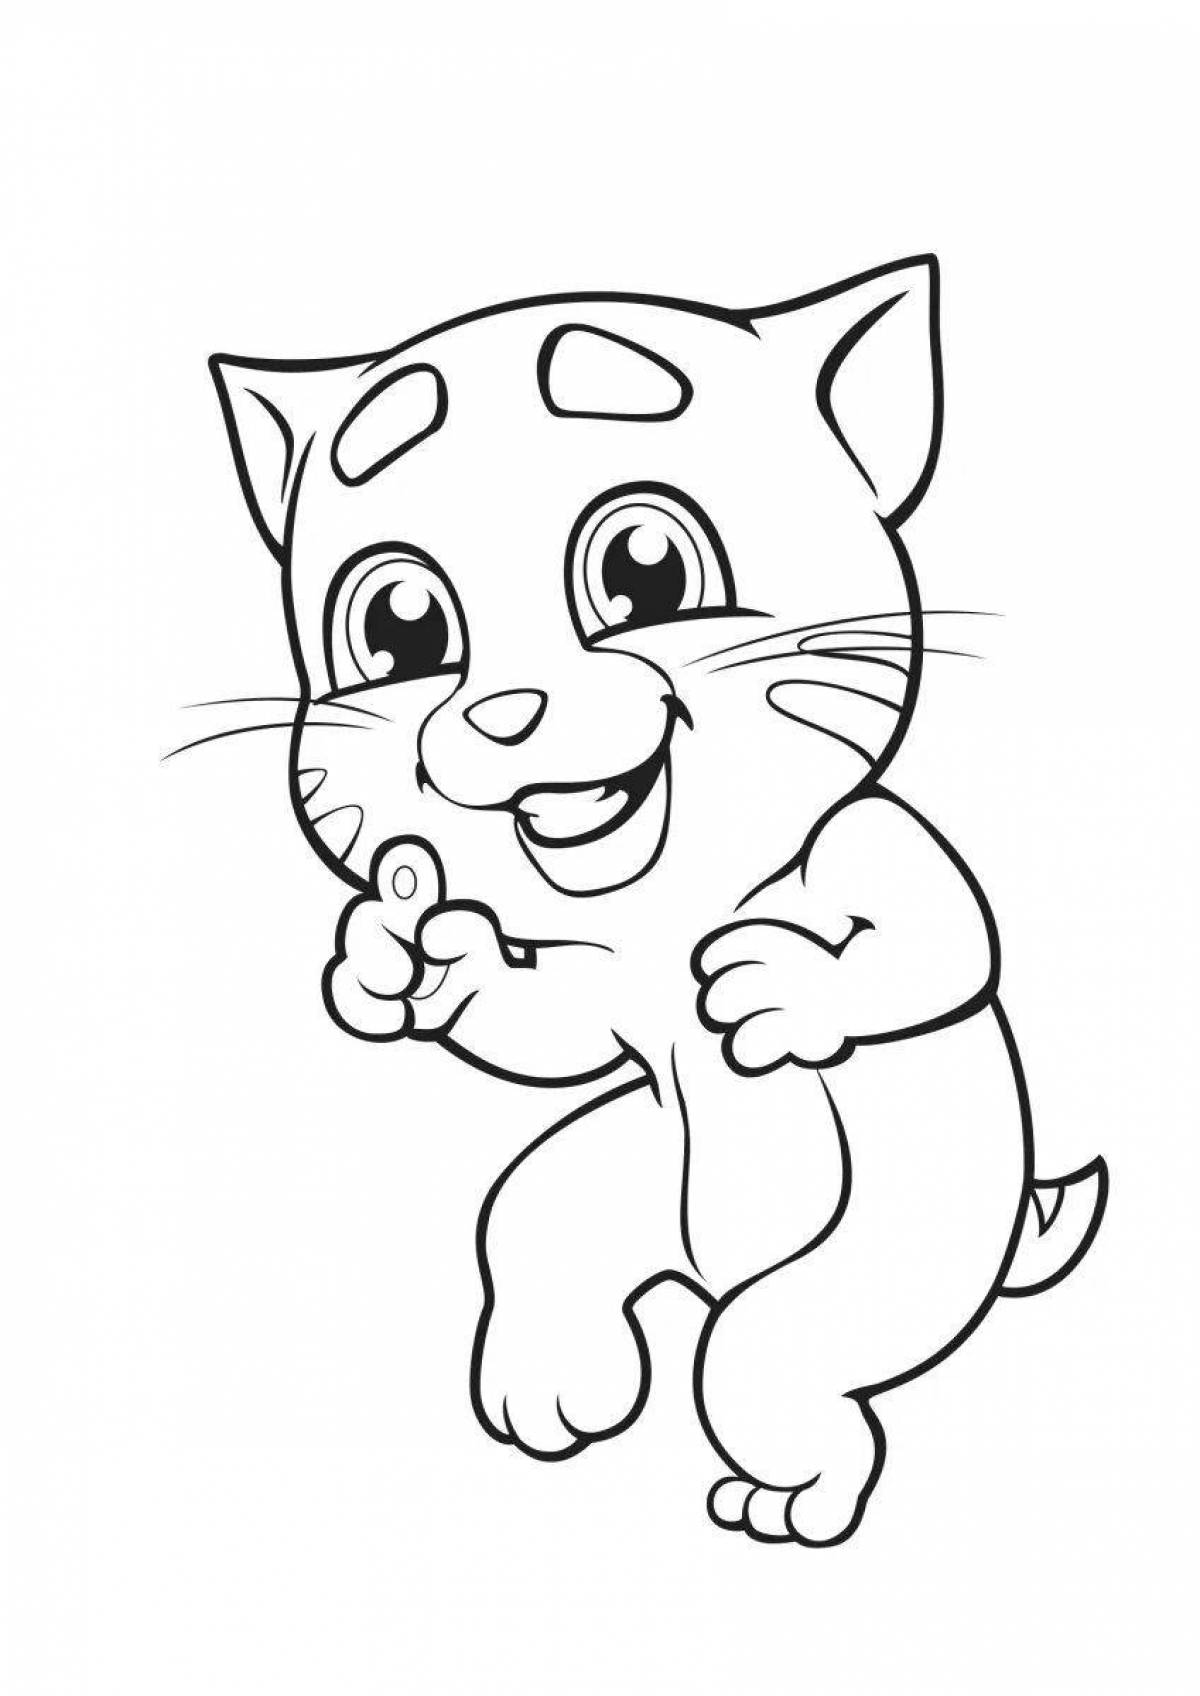 Adorable Booboo Kitten Coloring Page